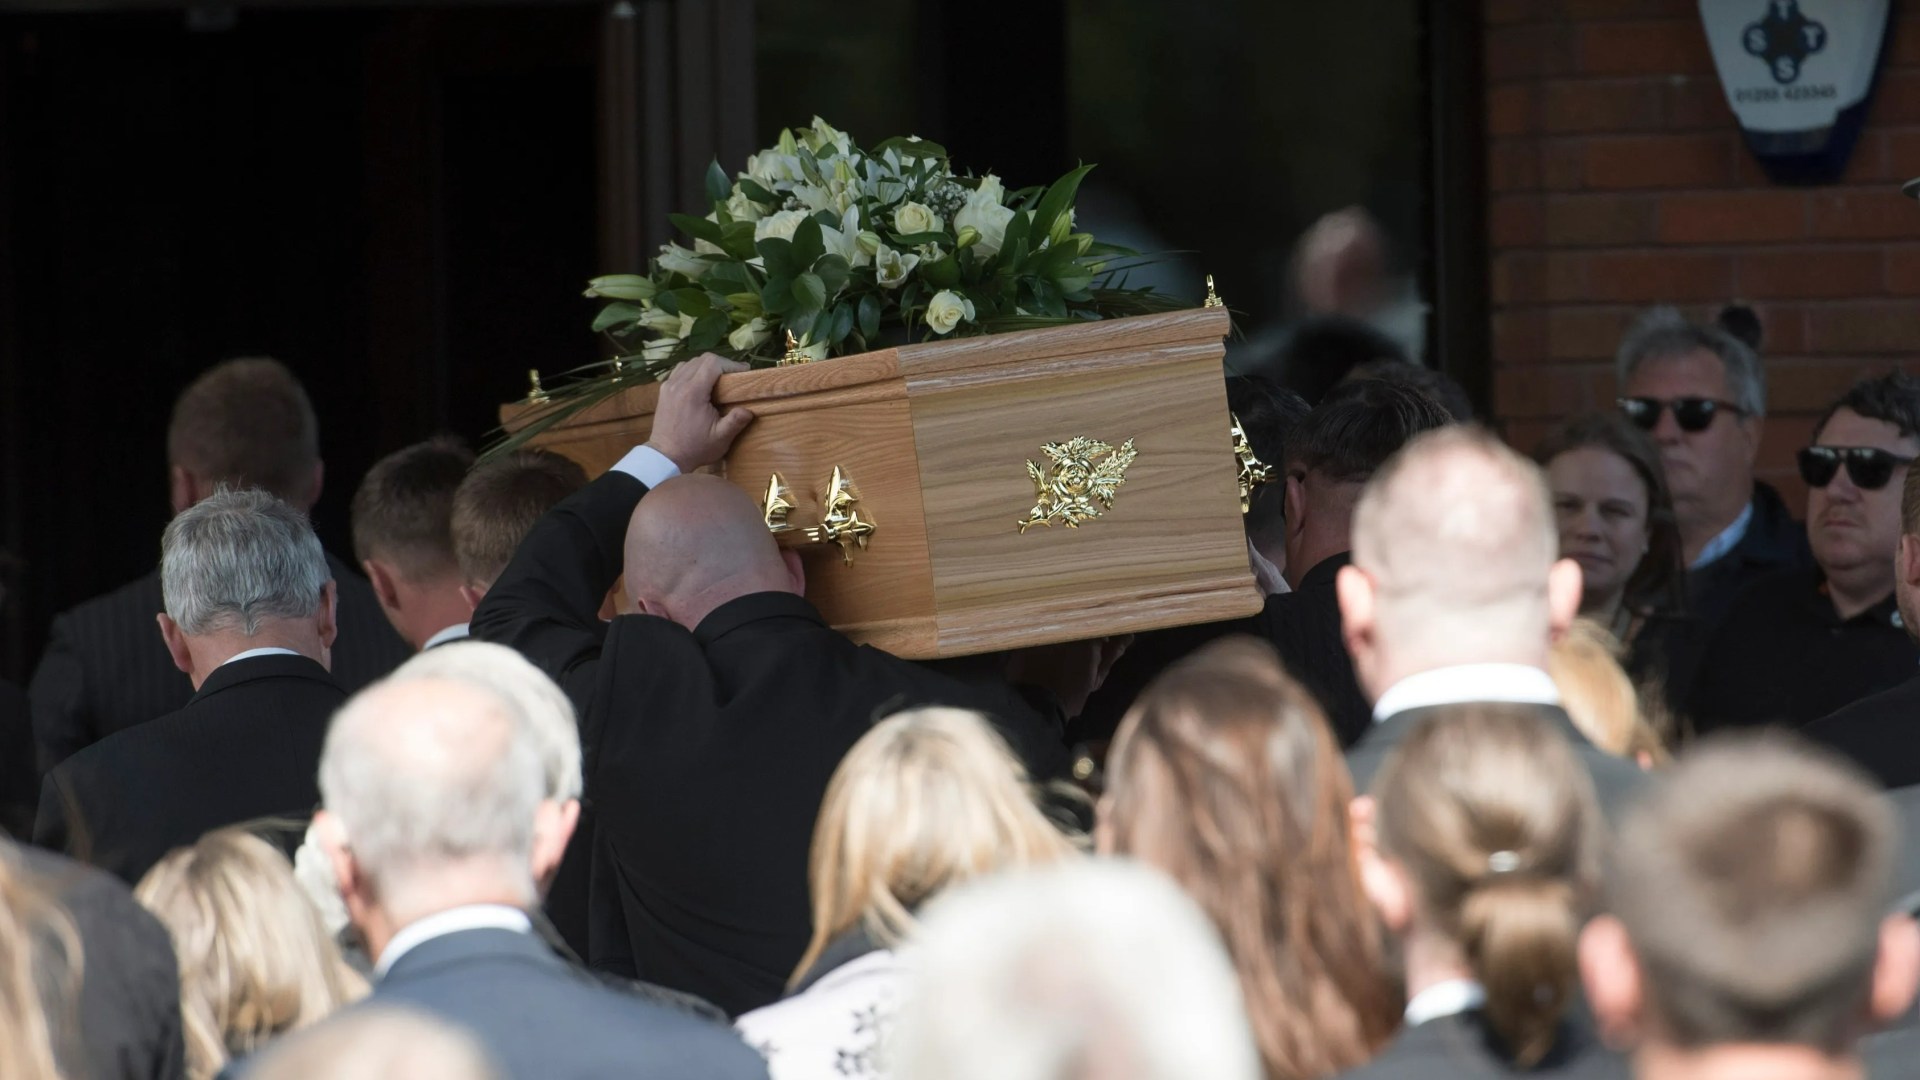 Hundreds gather for funeral of ‘funny and kind’ Gogglebox star George Gilbey who fell to his death in workplace tragedy [Video]